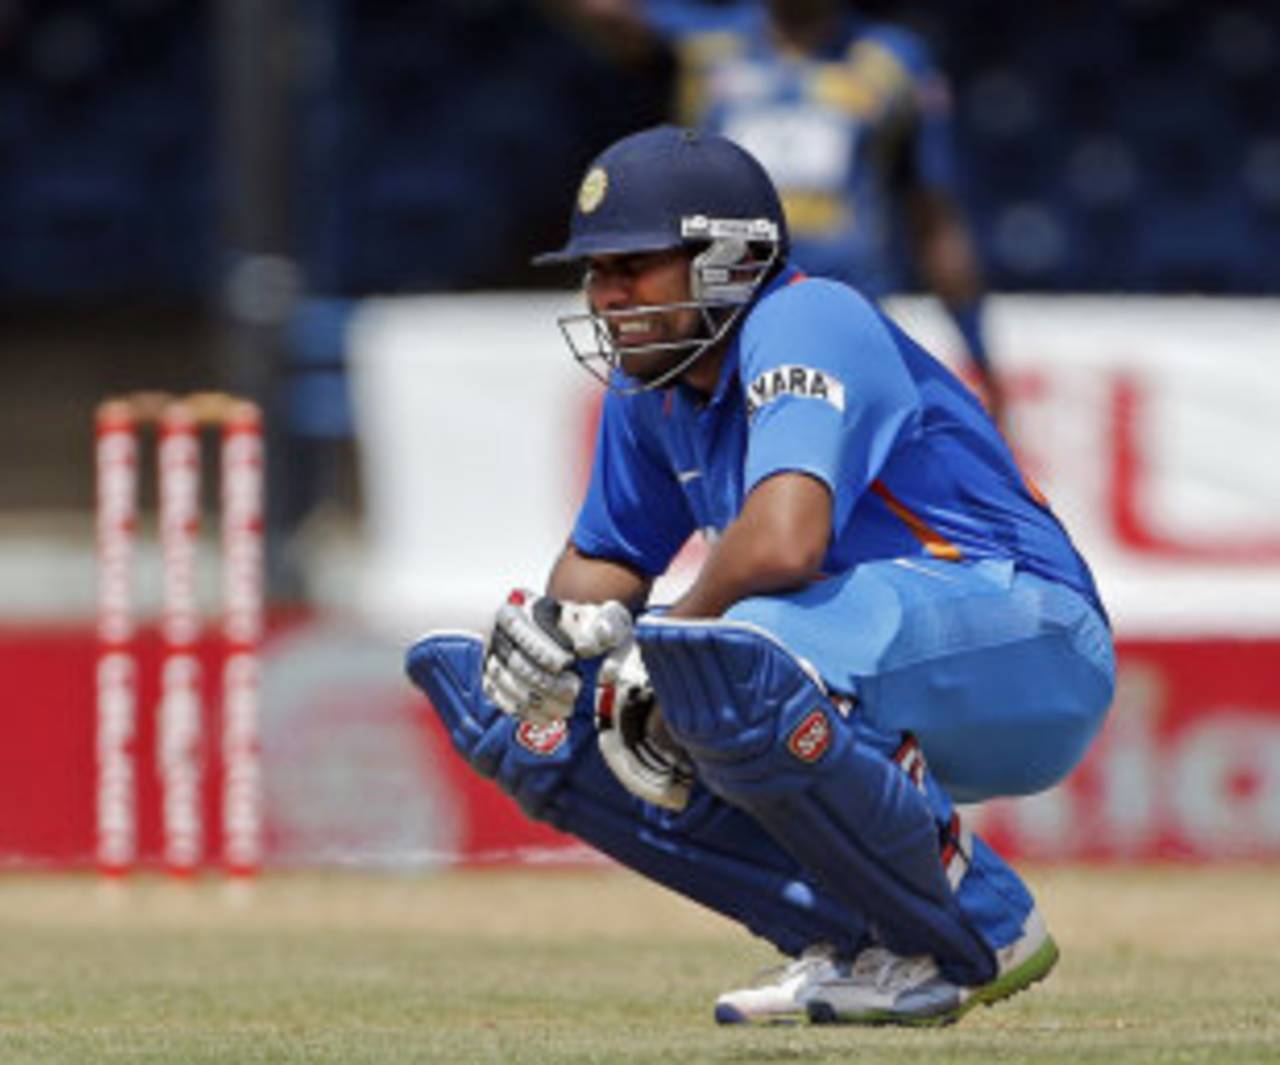 Rohit Sharma grimaces after getting hit on the body, India v Sri Lanka, West Indies tri-series, Port-of-Spain, July 9, 2013